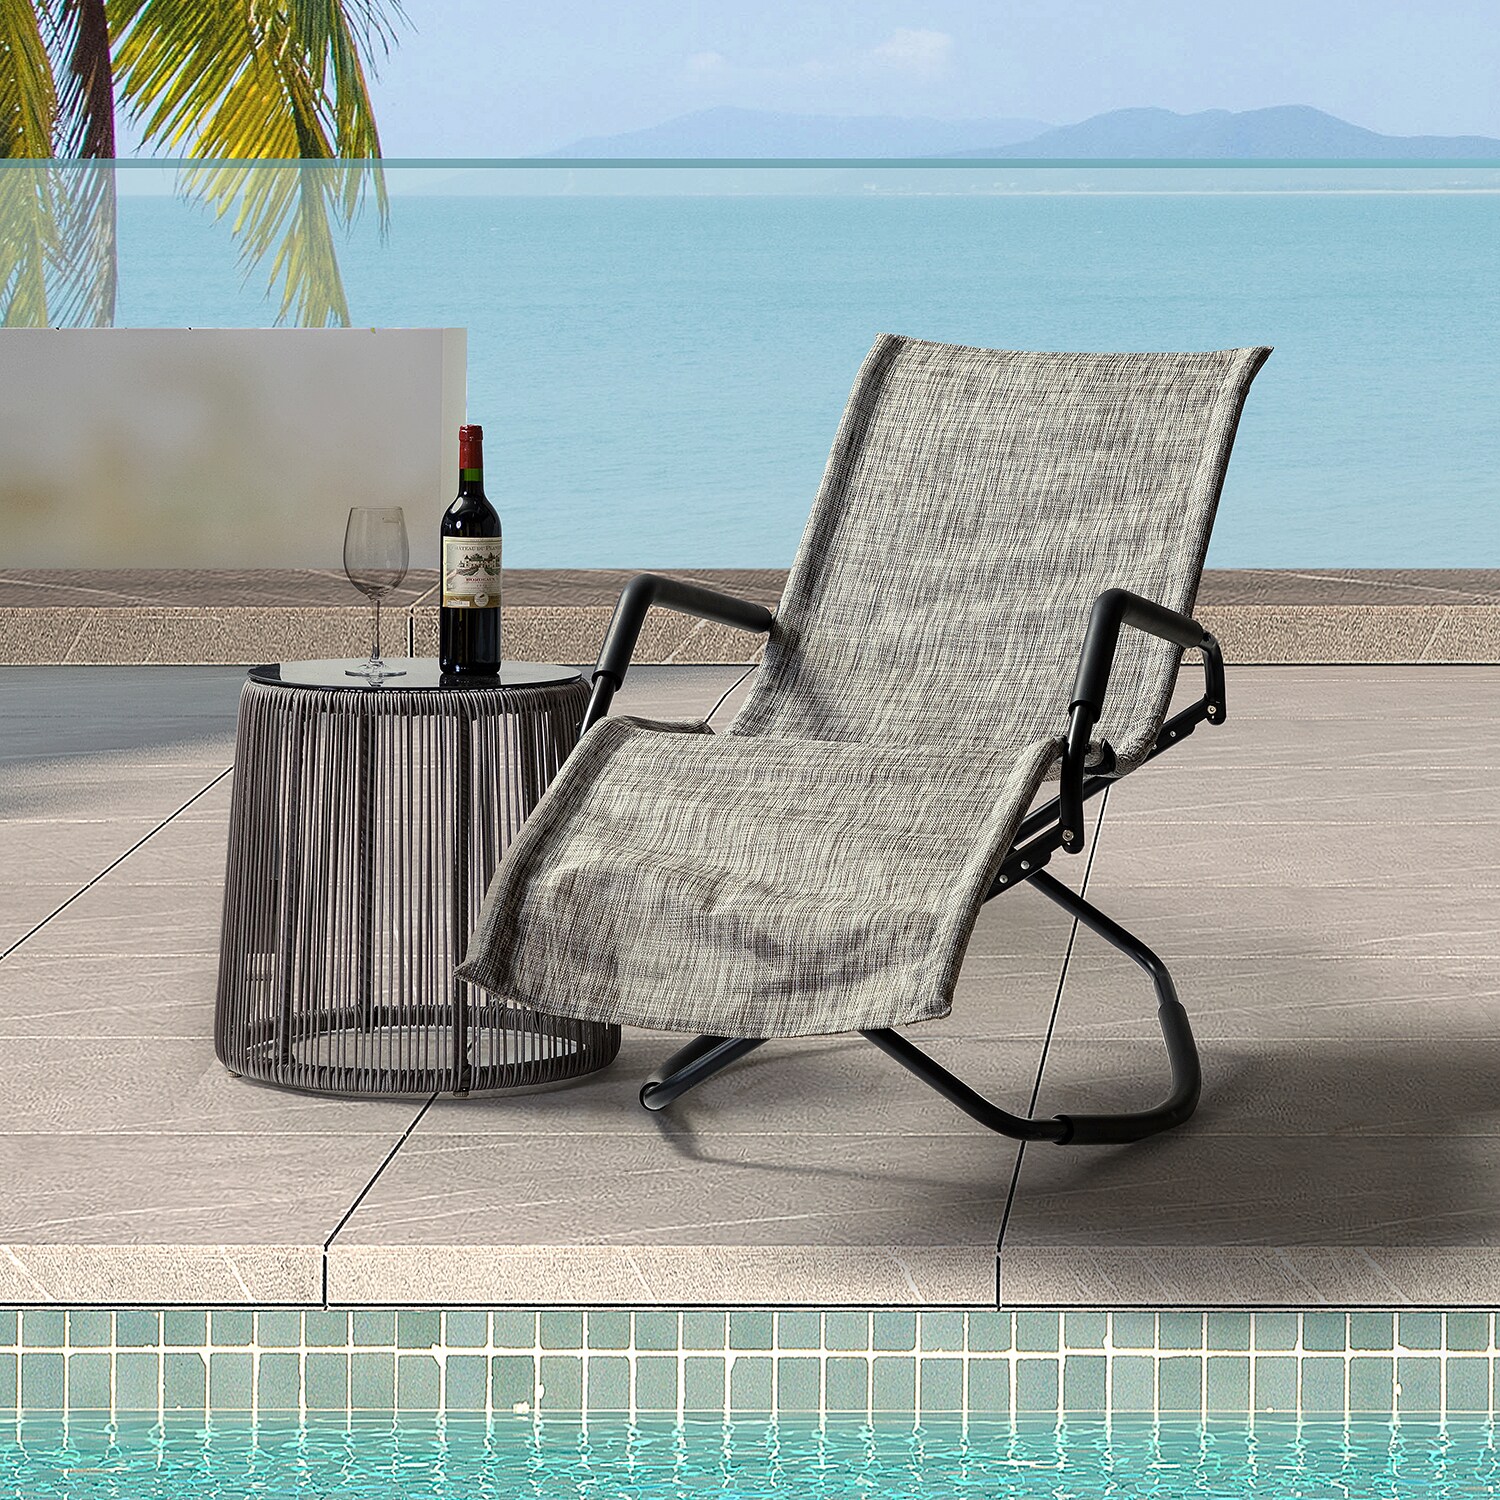 Reviews for Sunnydaze Decor Sling Double Outdoor Rocking Chaise